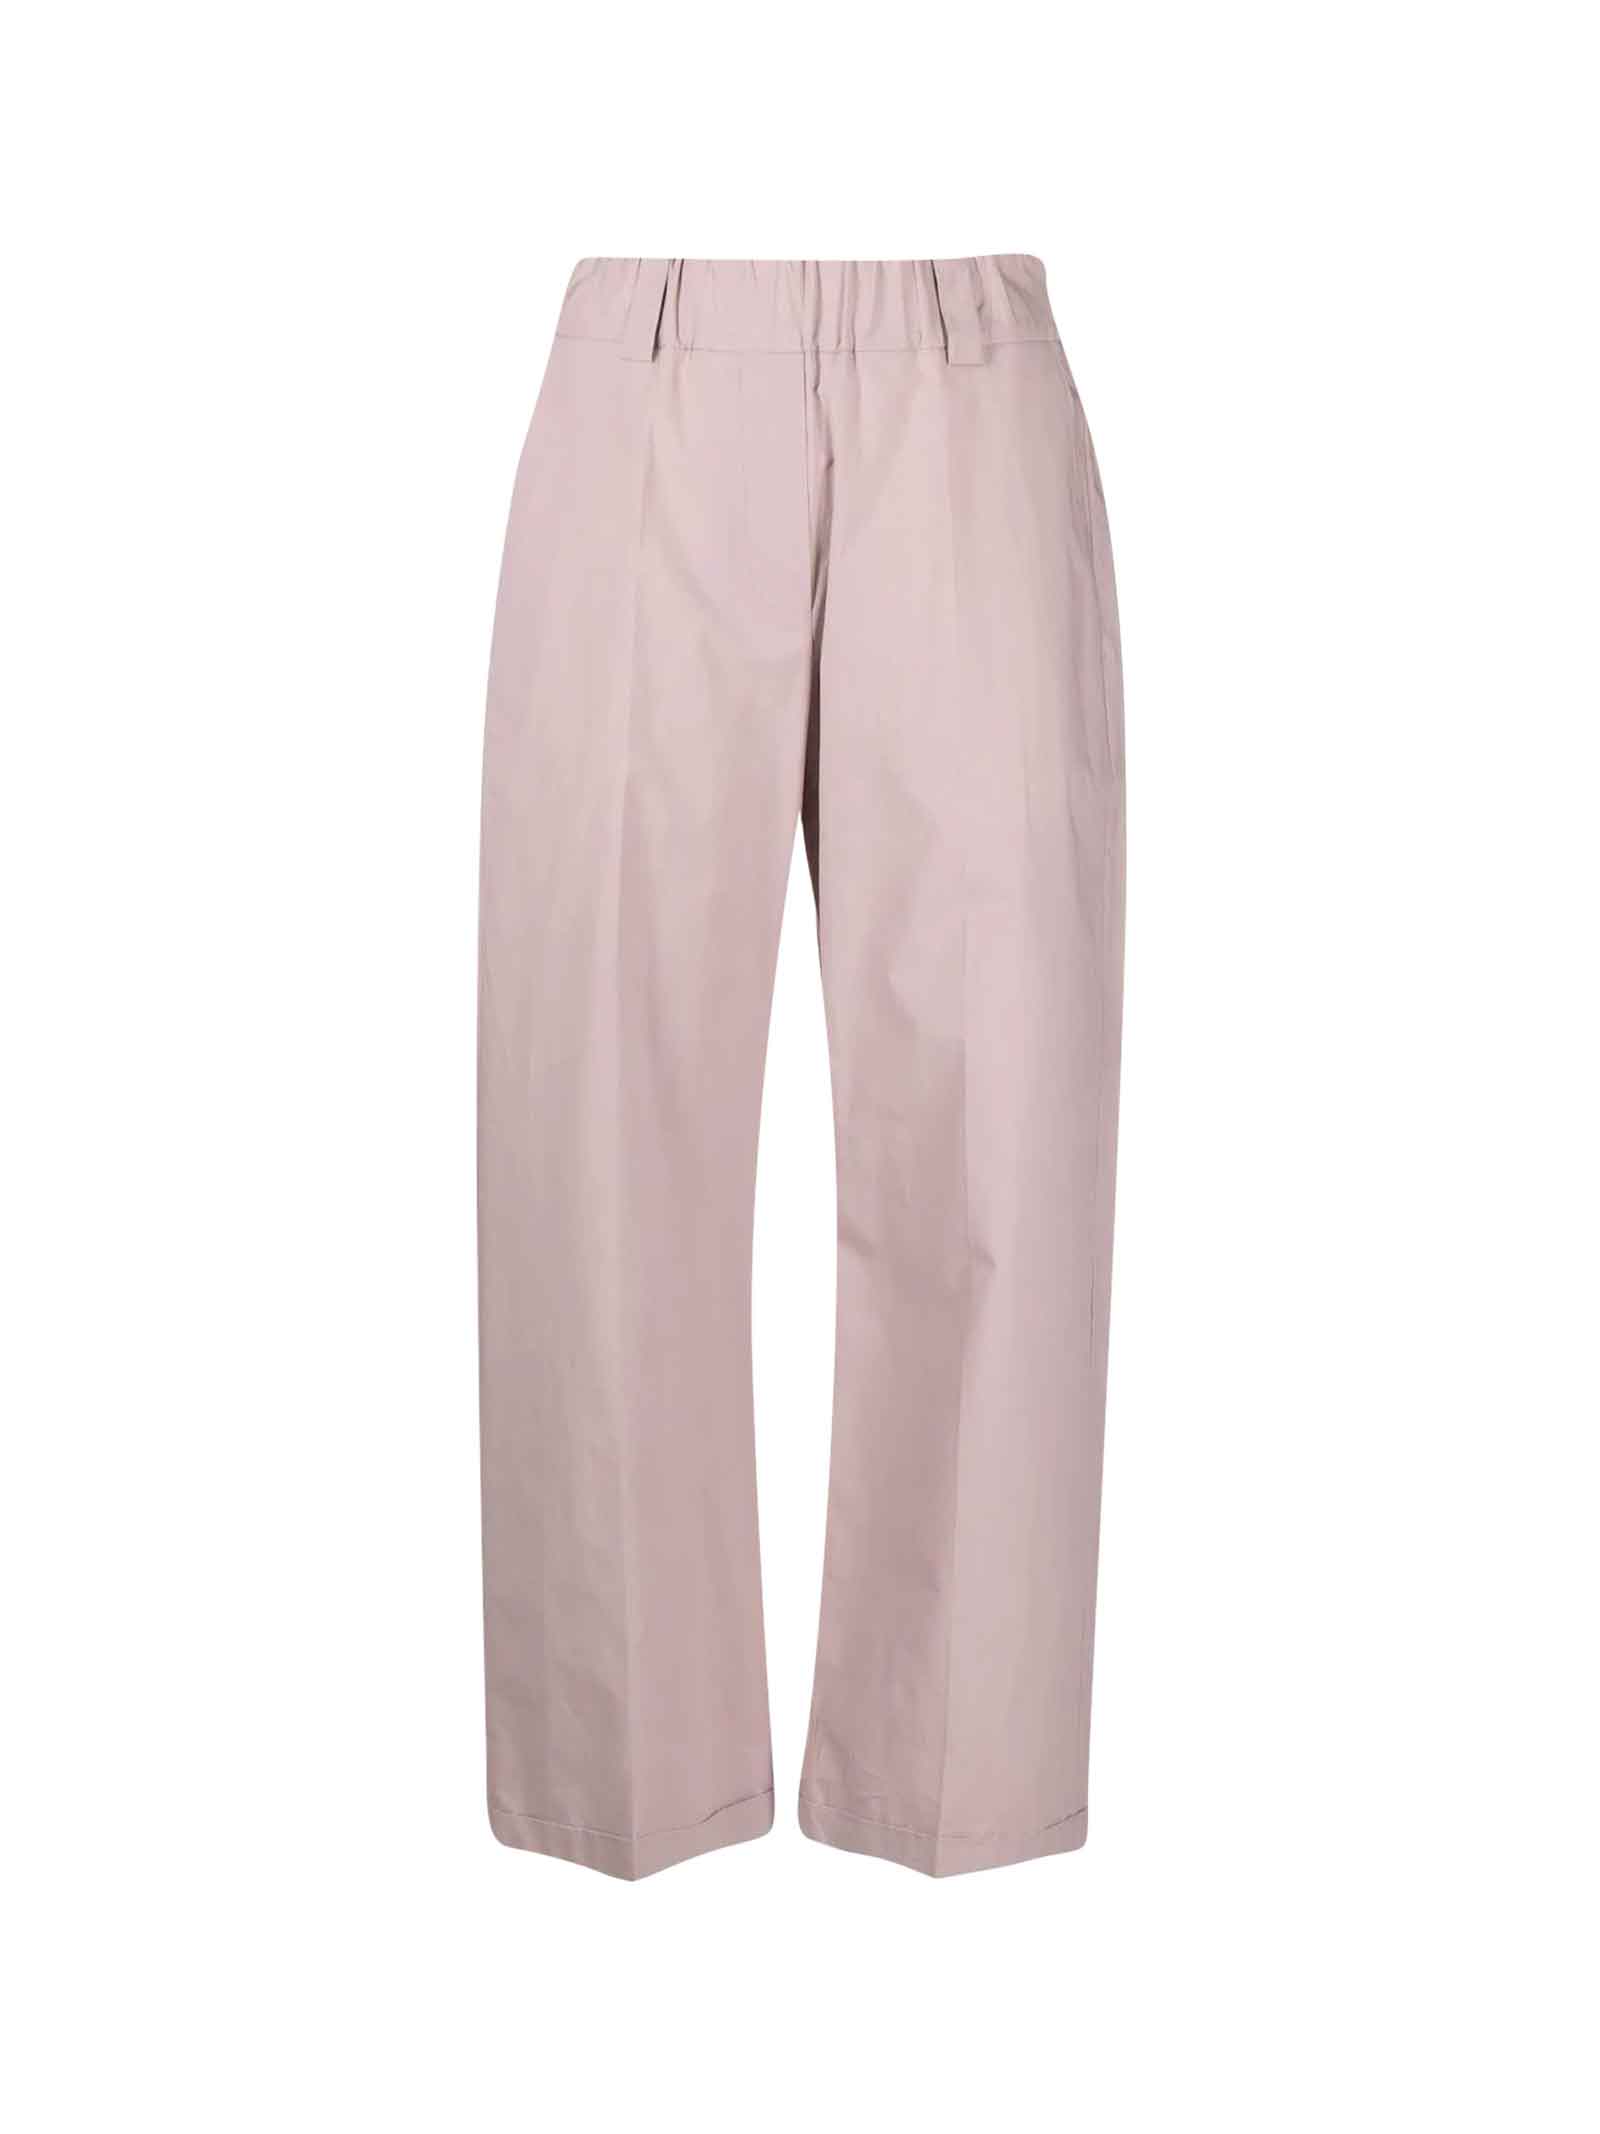 Alysi Orchid Trousers